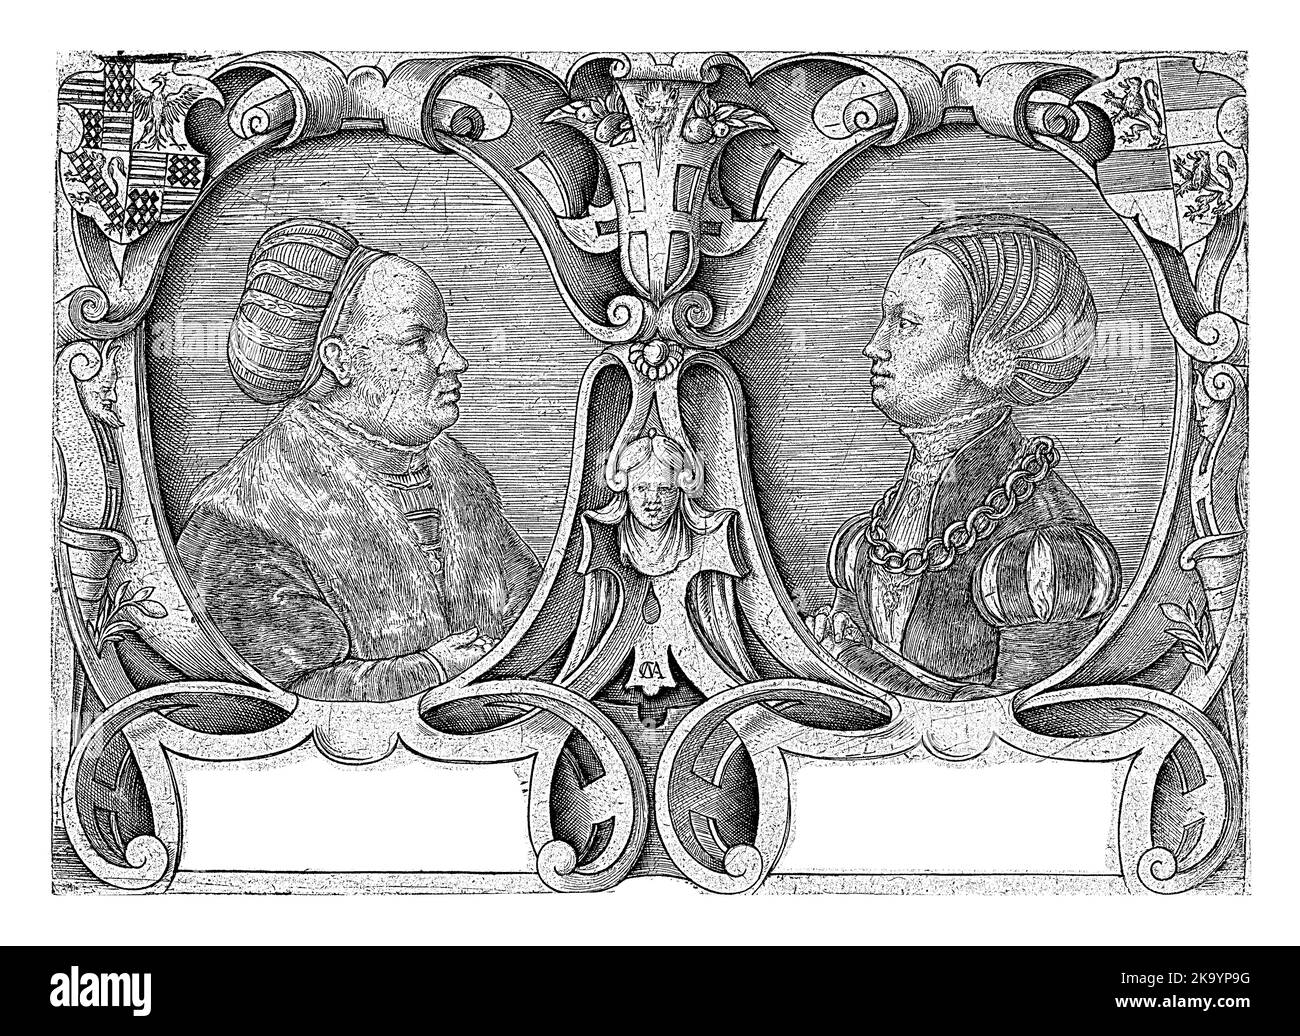 Double portrait of Count Ernst II Mansfeld zu Vorderort and of his second wife Dorothea von Solms-Lich, both in profile. Stock Photo